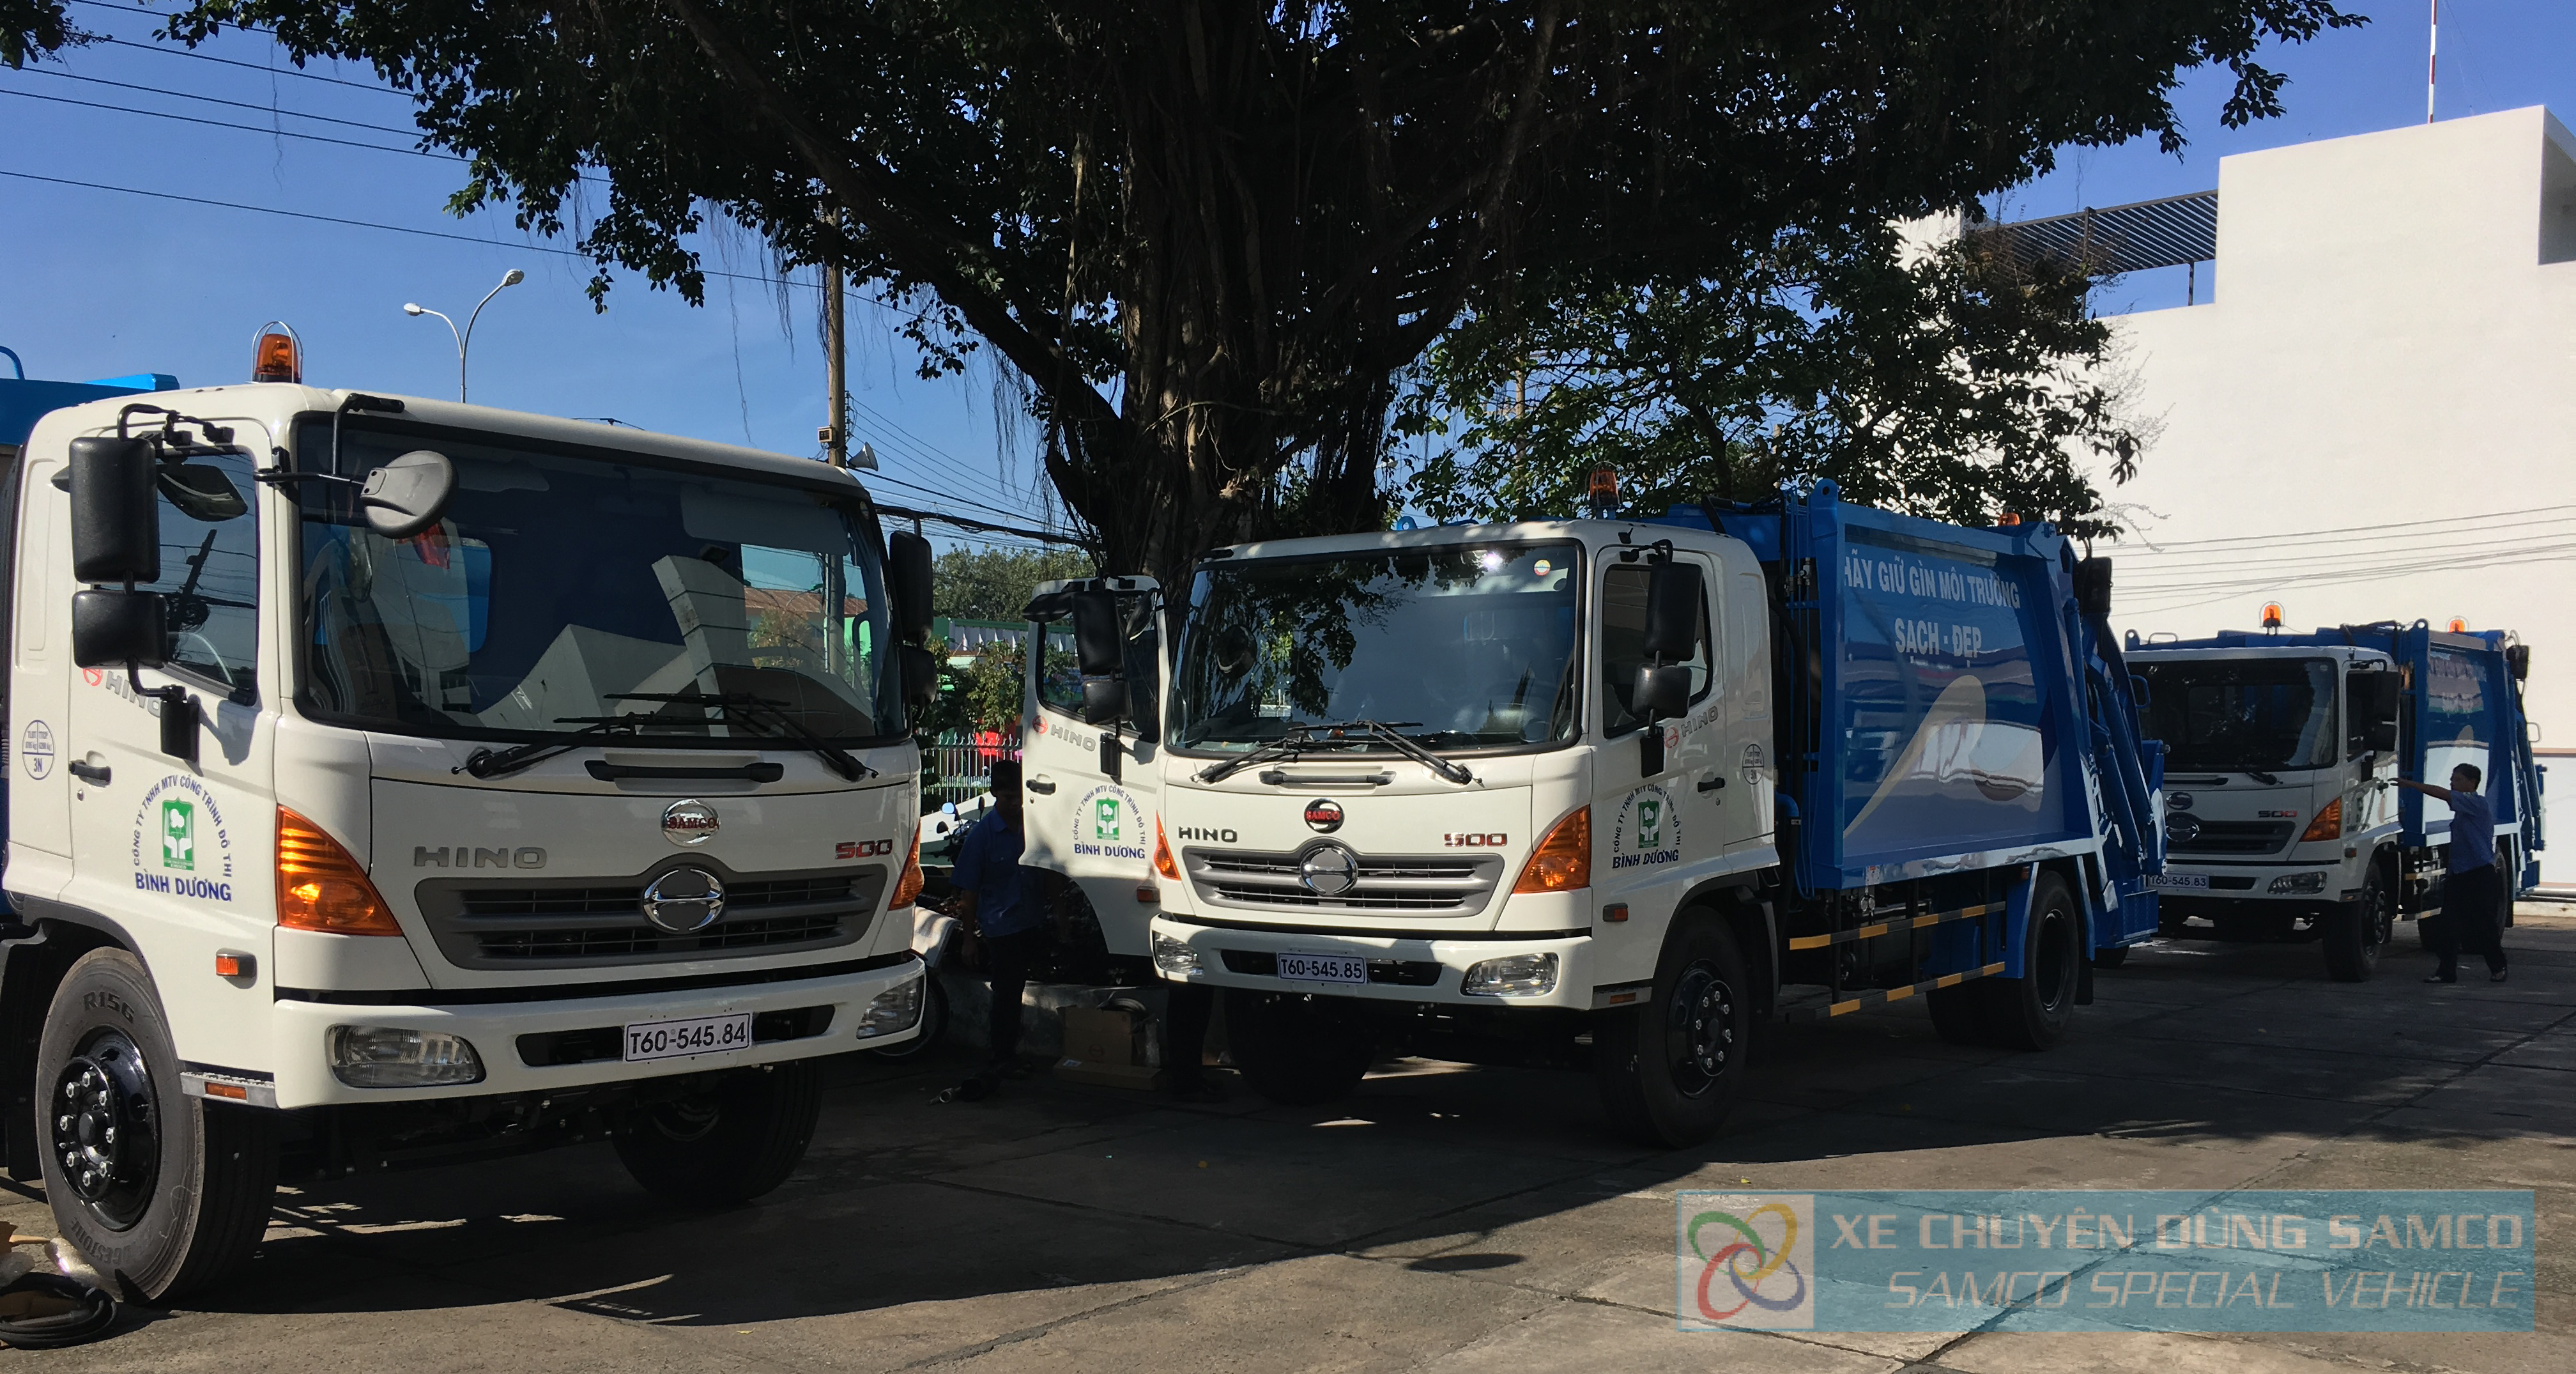 Binh Duong Urban Construction Company received 03 Bulldoze Garbage truck made by SAMCO